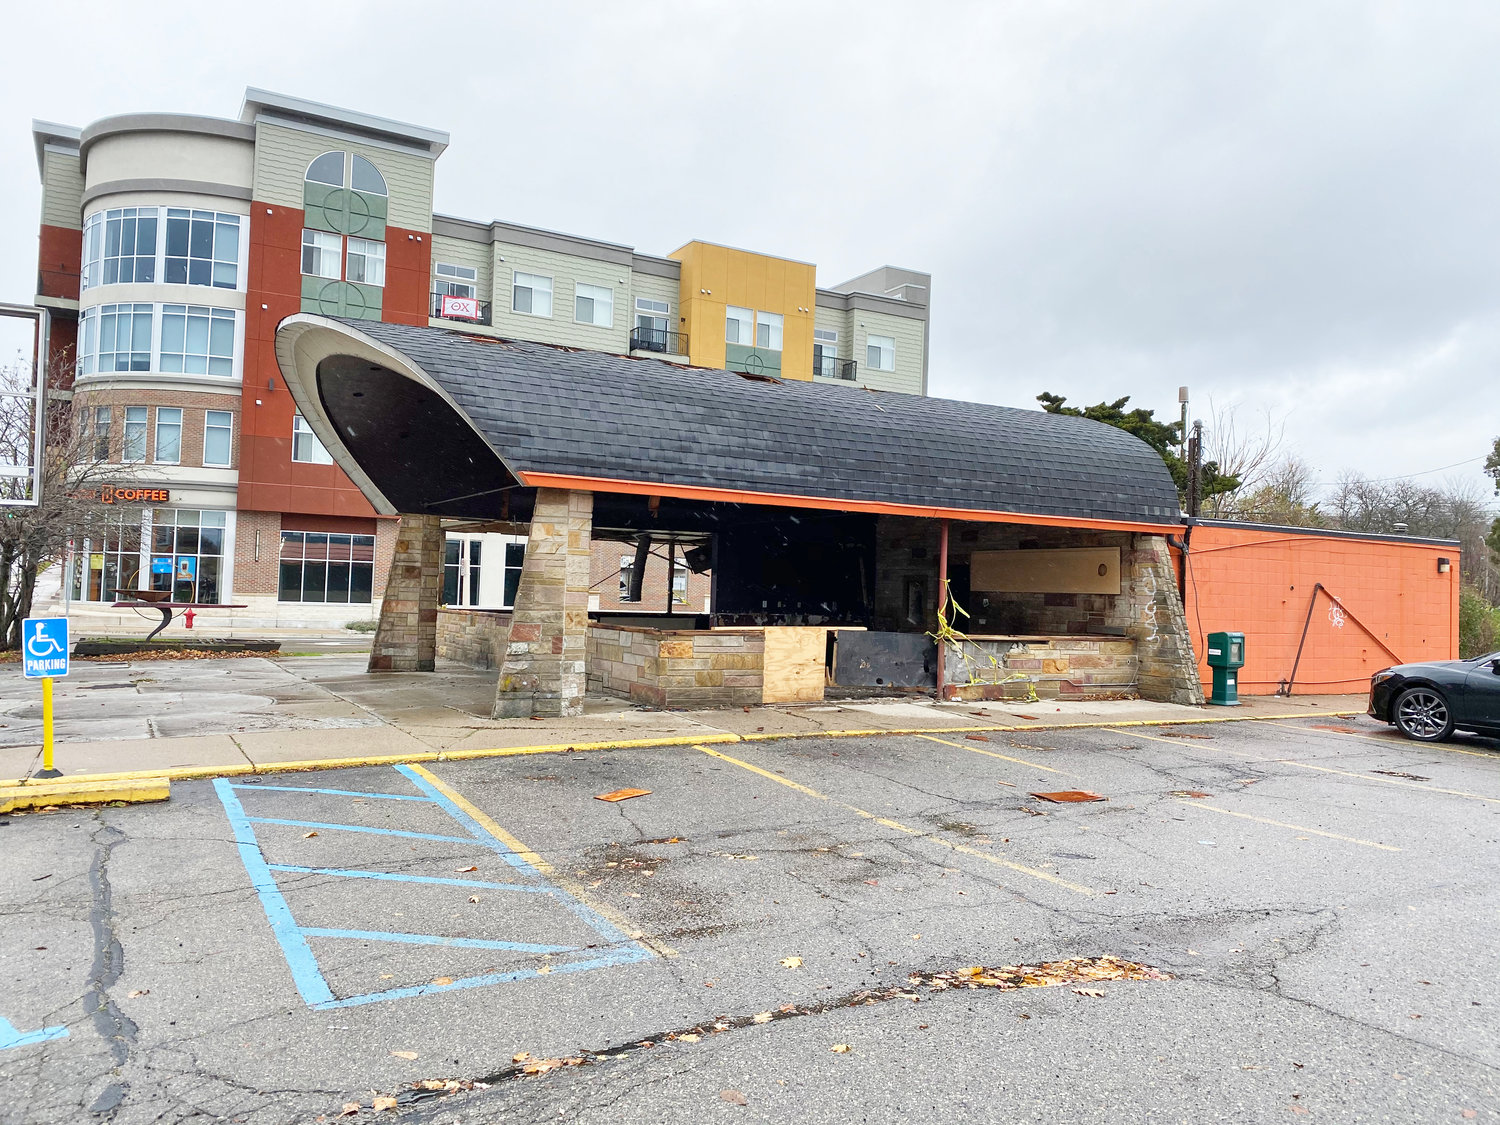 The original Biggby Coffee shop at 270 W. Grand River Ave. in Lansing as it appeared last month. To the left is Biggby’s new home.